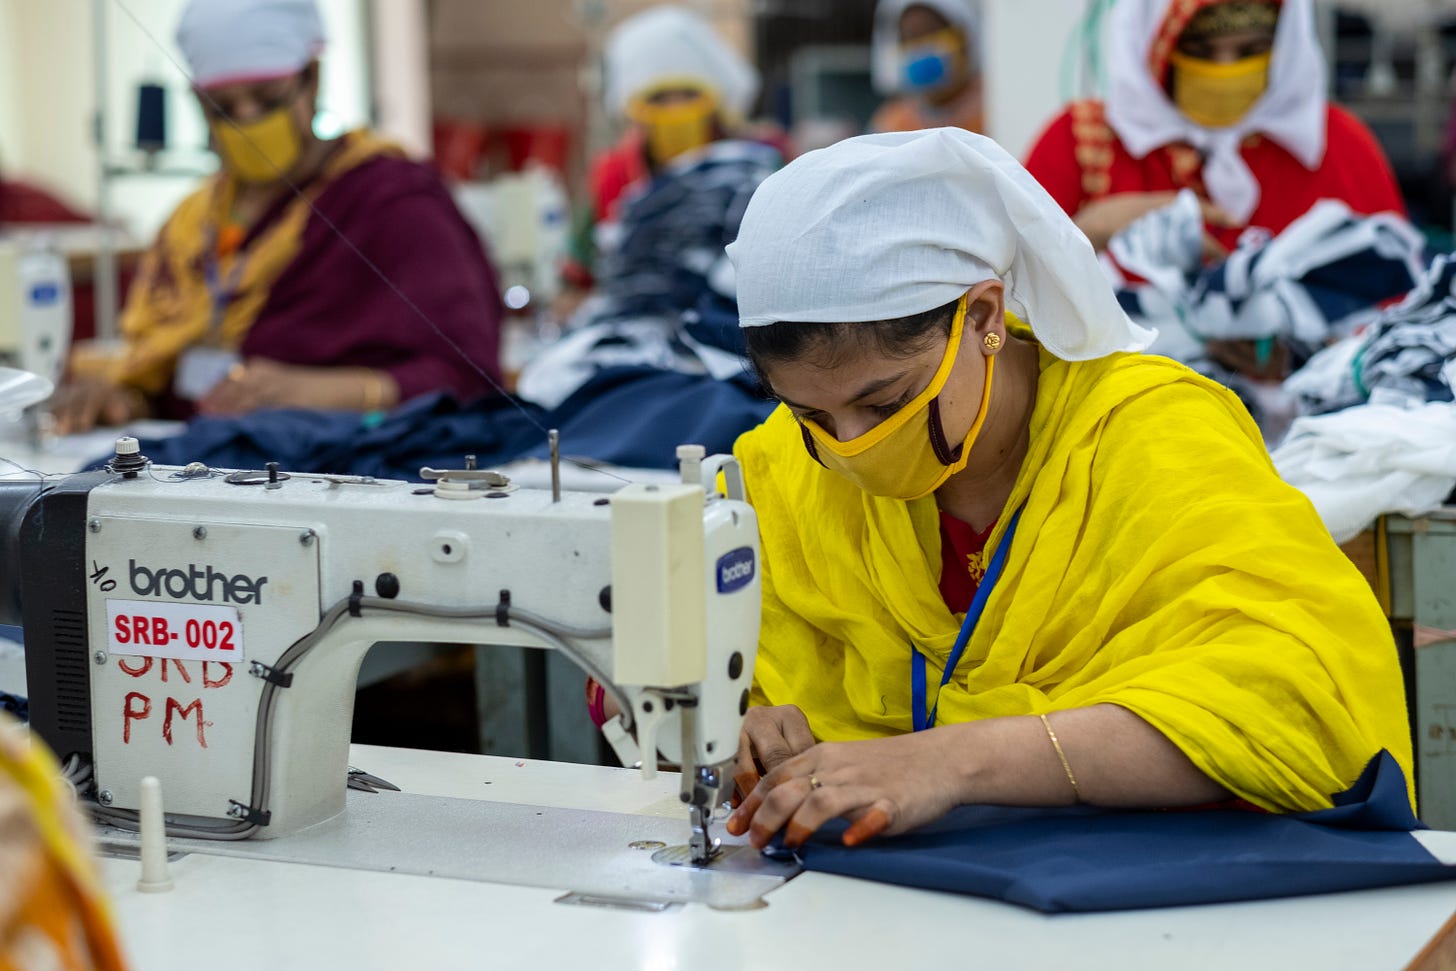 A woman in a yellow sari and facemask works at a sewing machine in a factory, surrounded by other women doing the same